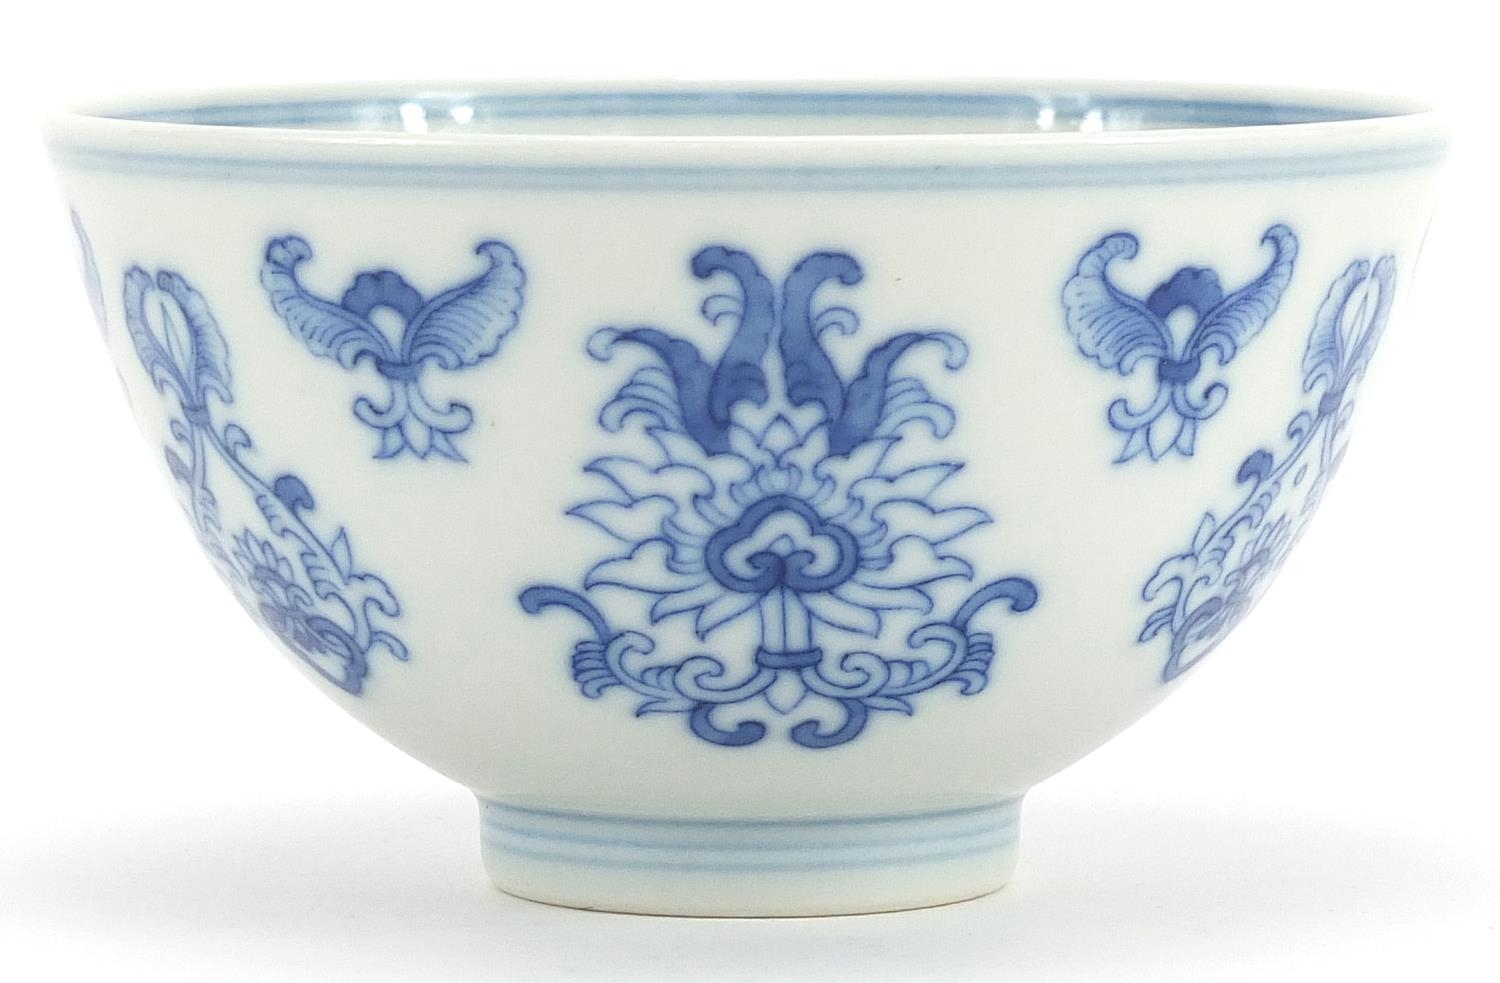 Chinese blue and white porcelain footed bowl hand painted with flowers, six figure character marks